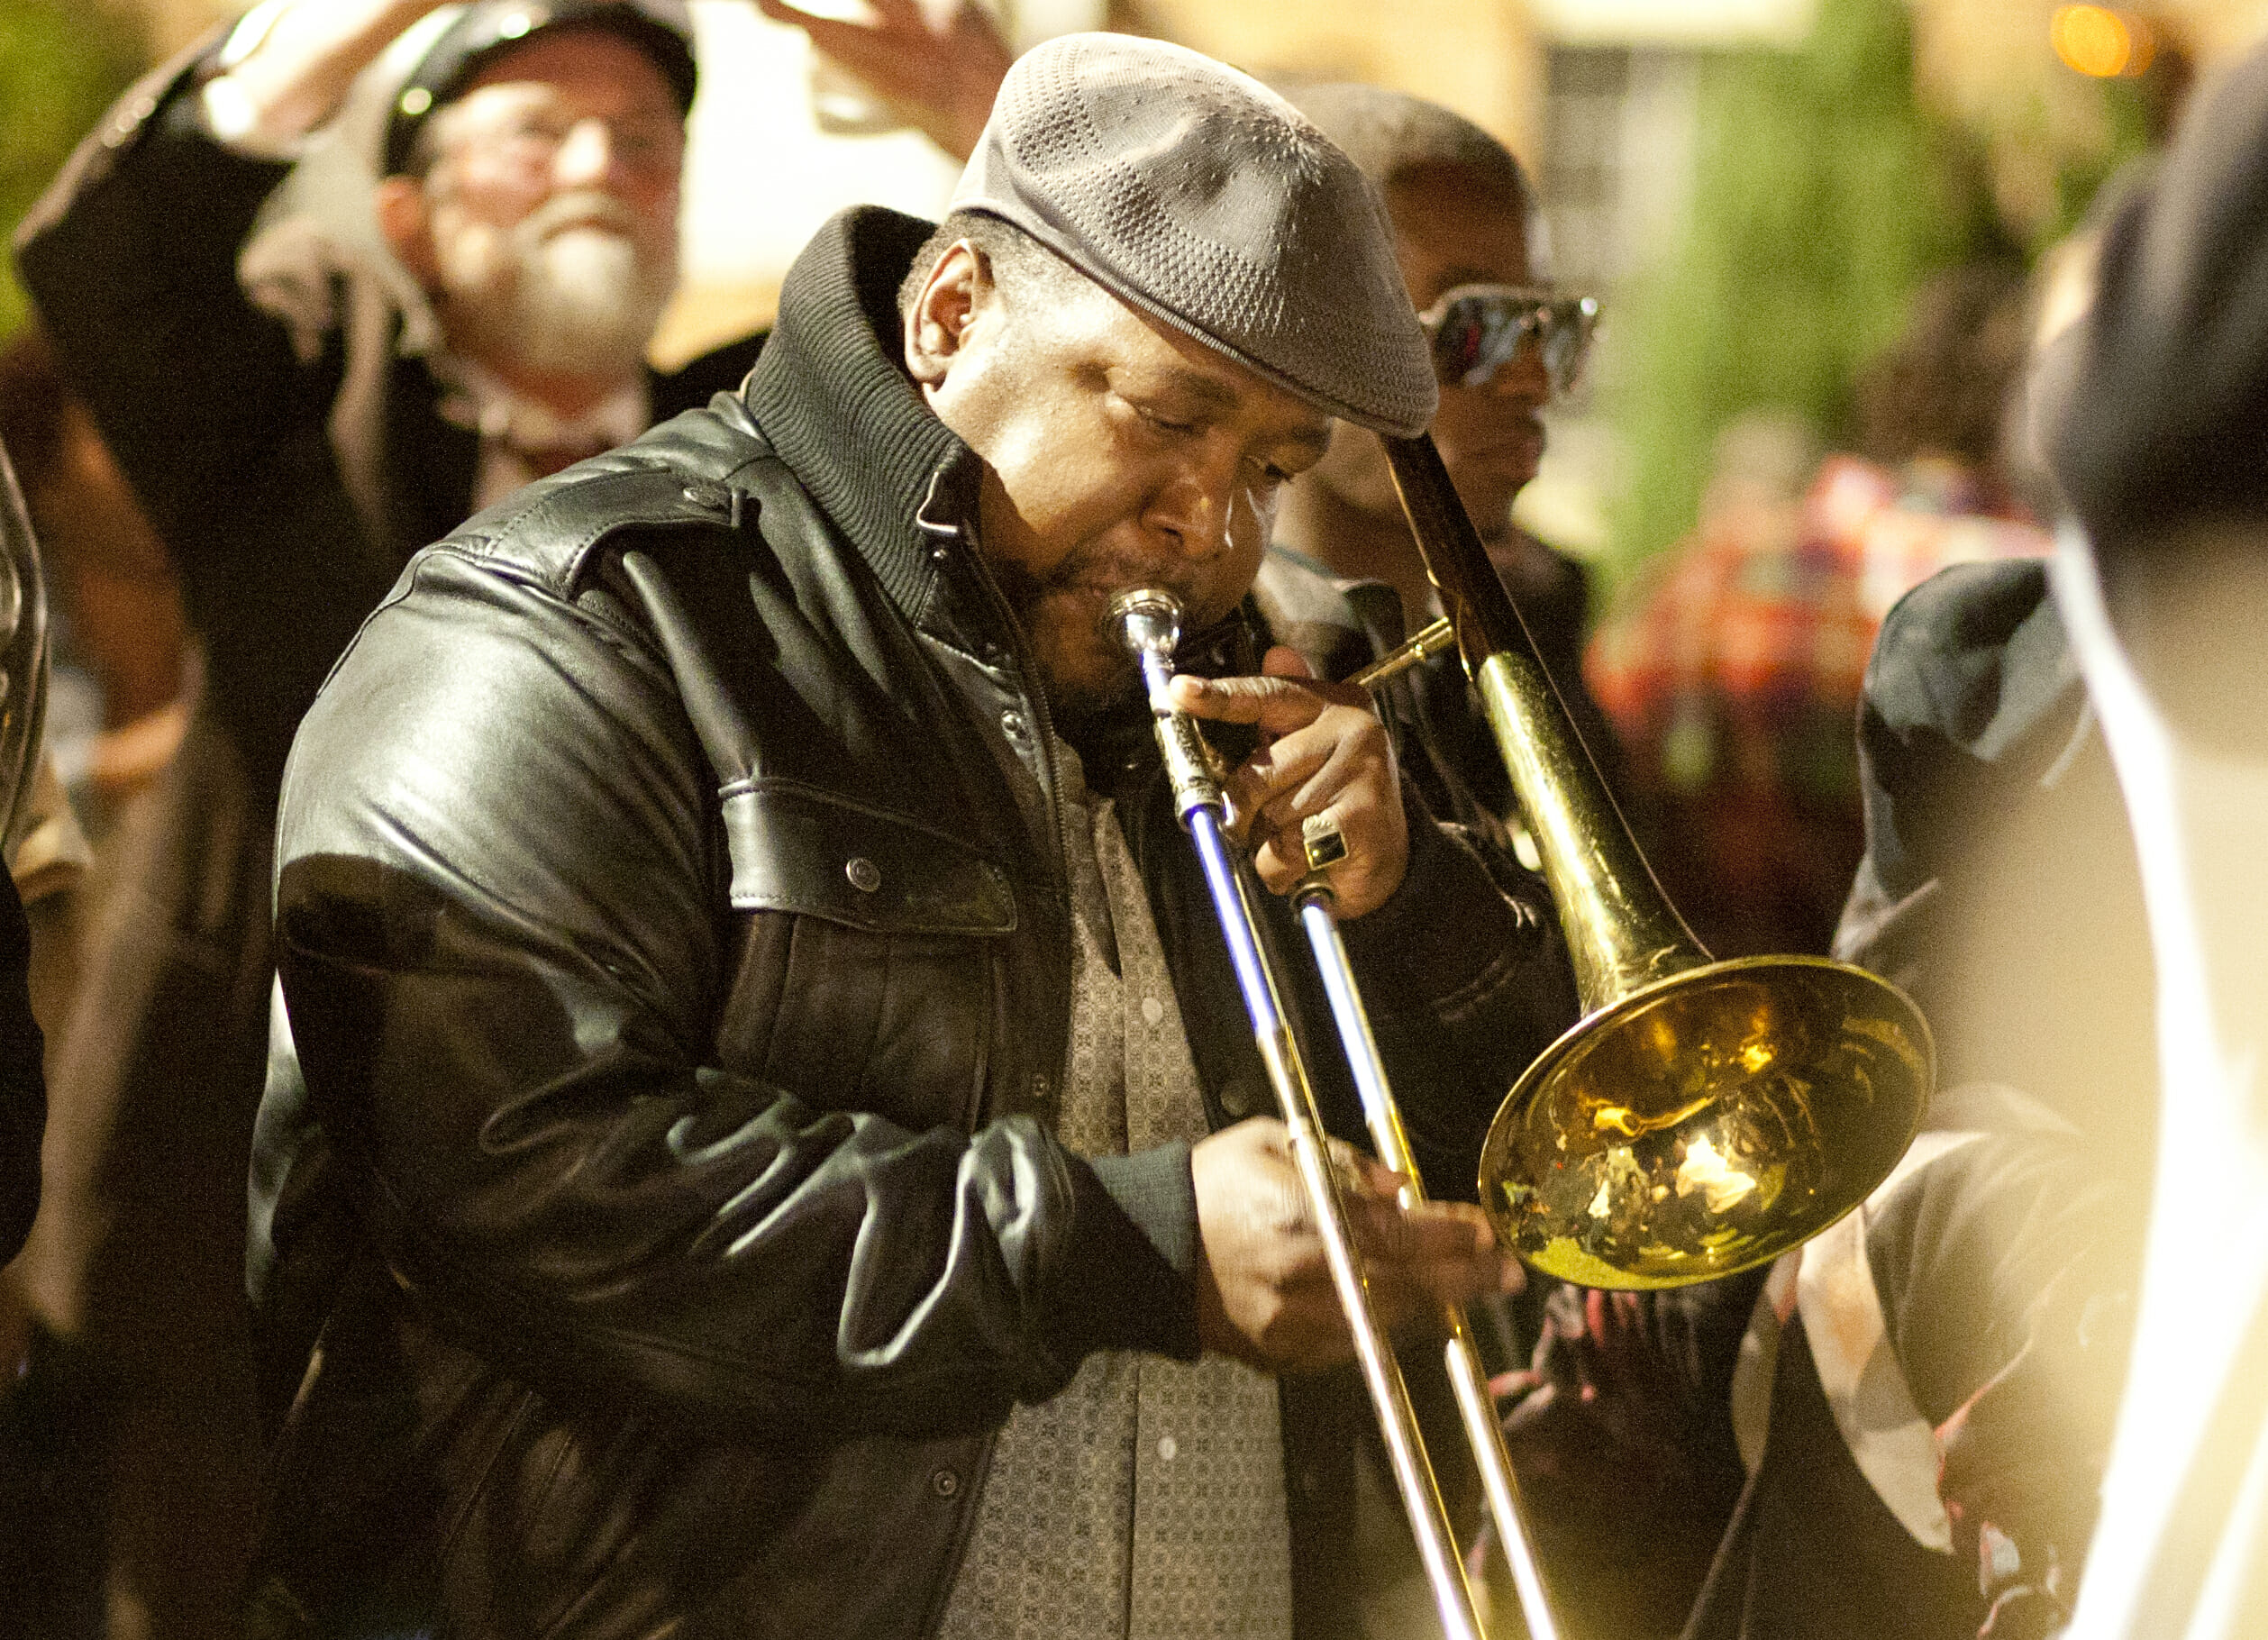 Treme: “Knock With Me—Rock With Me” (Episode 3.1)